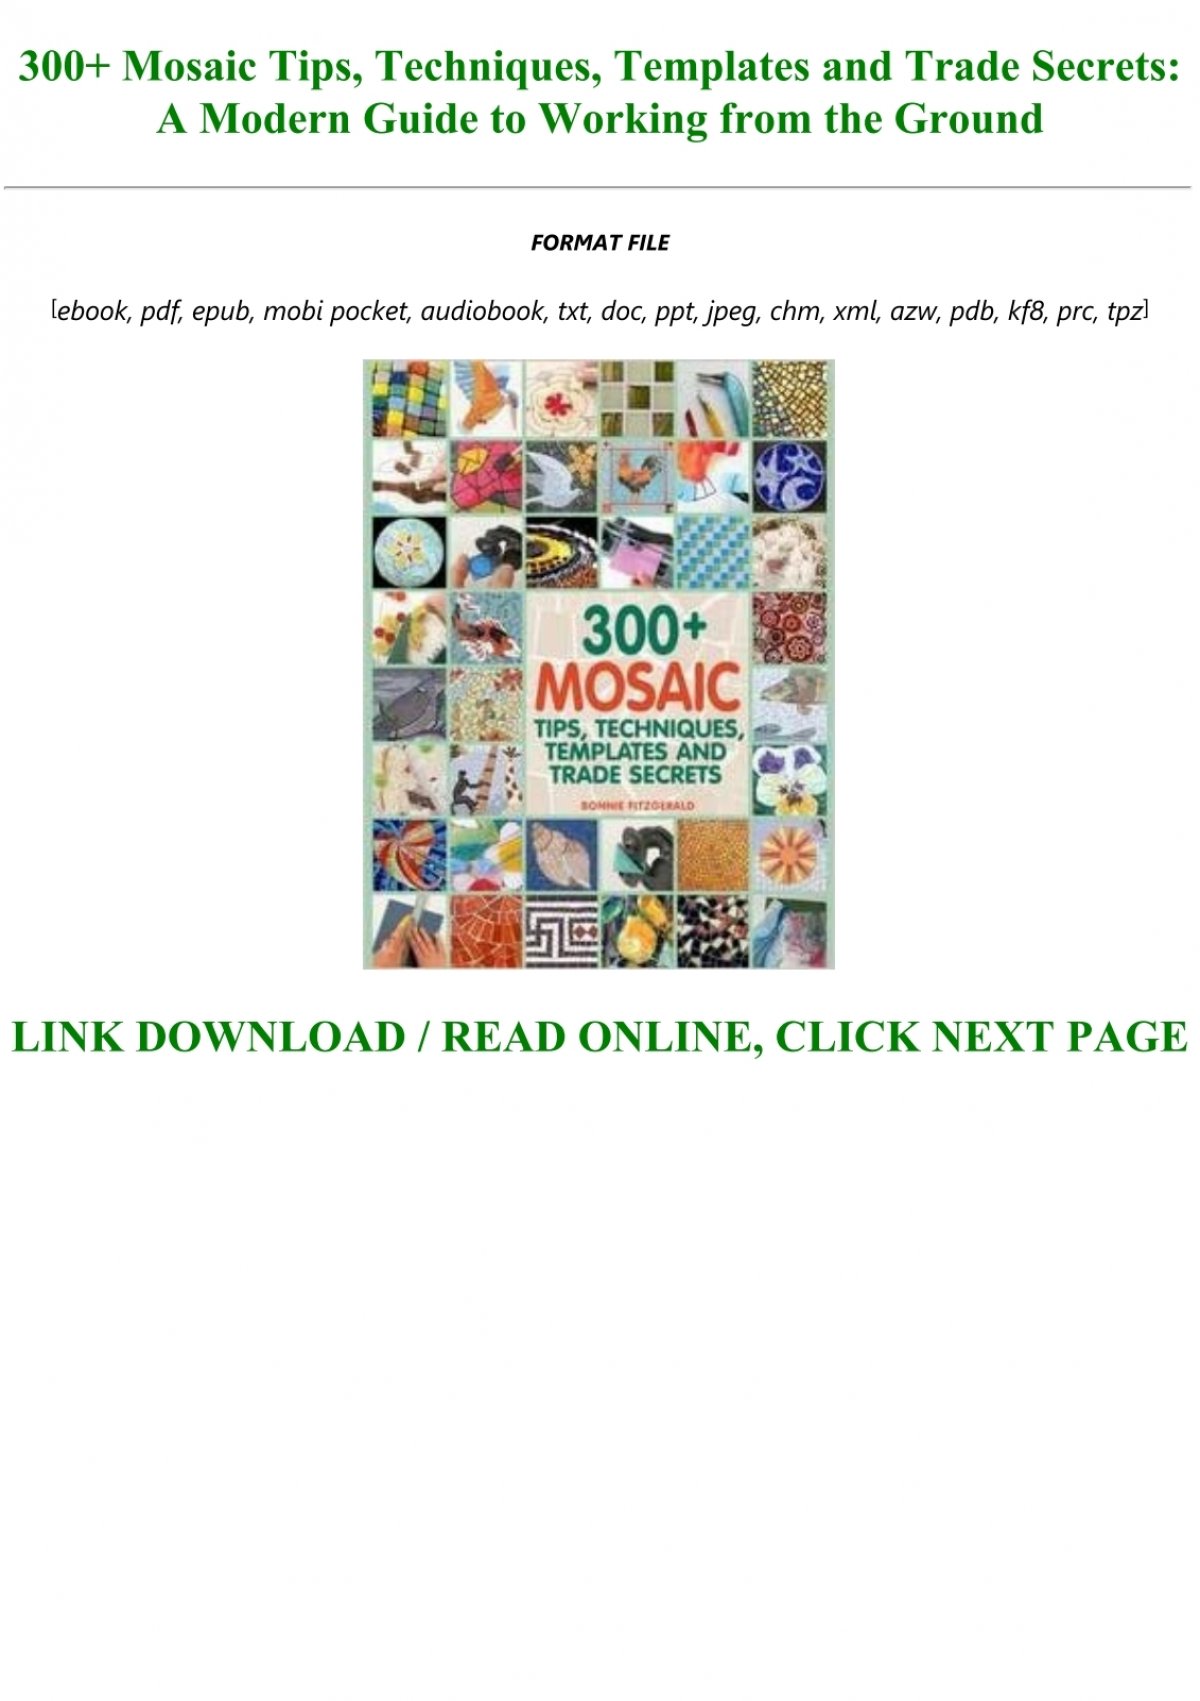 download-in-pdf-300-mosaic-tips-techniques-templates-and-trade